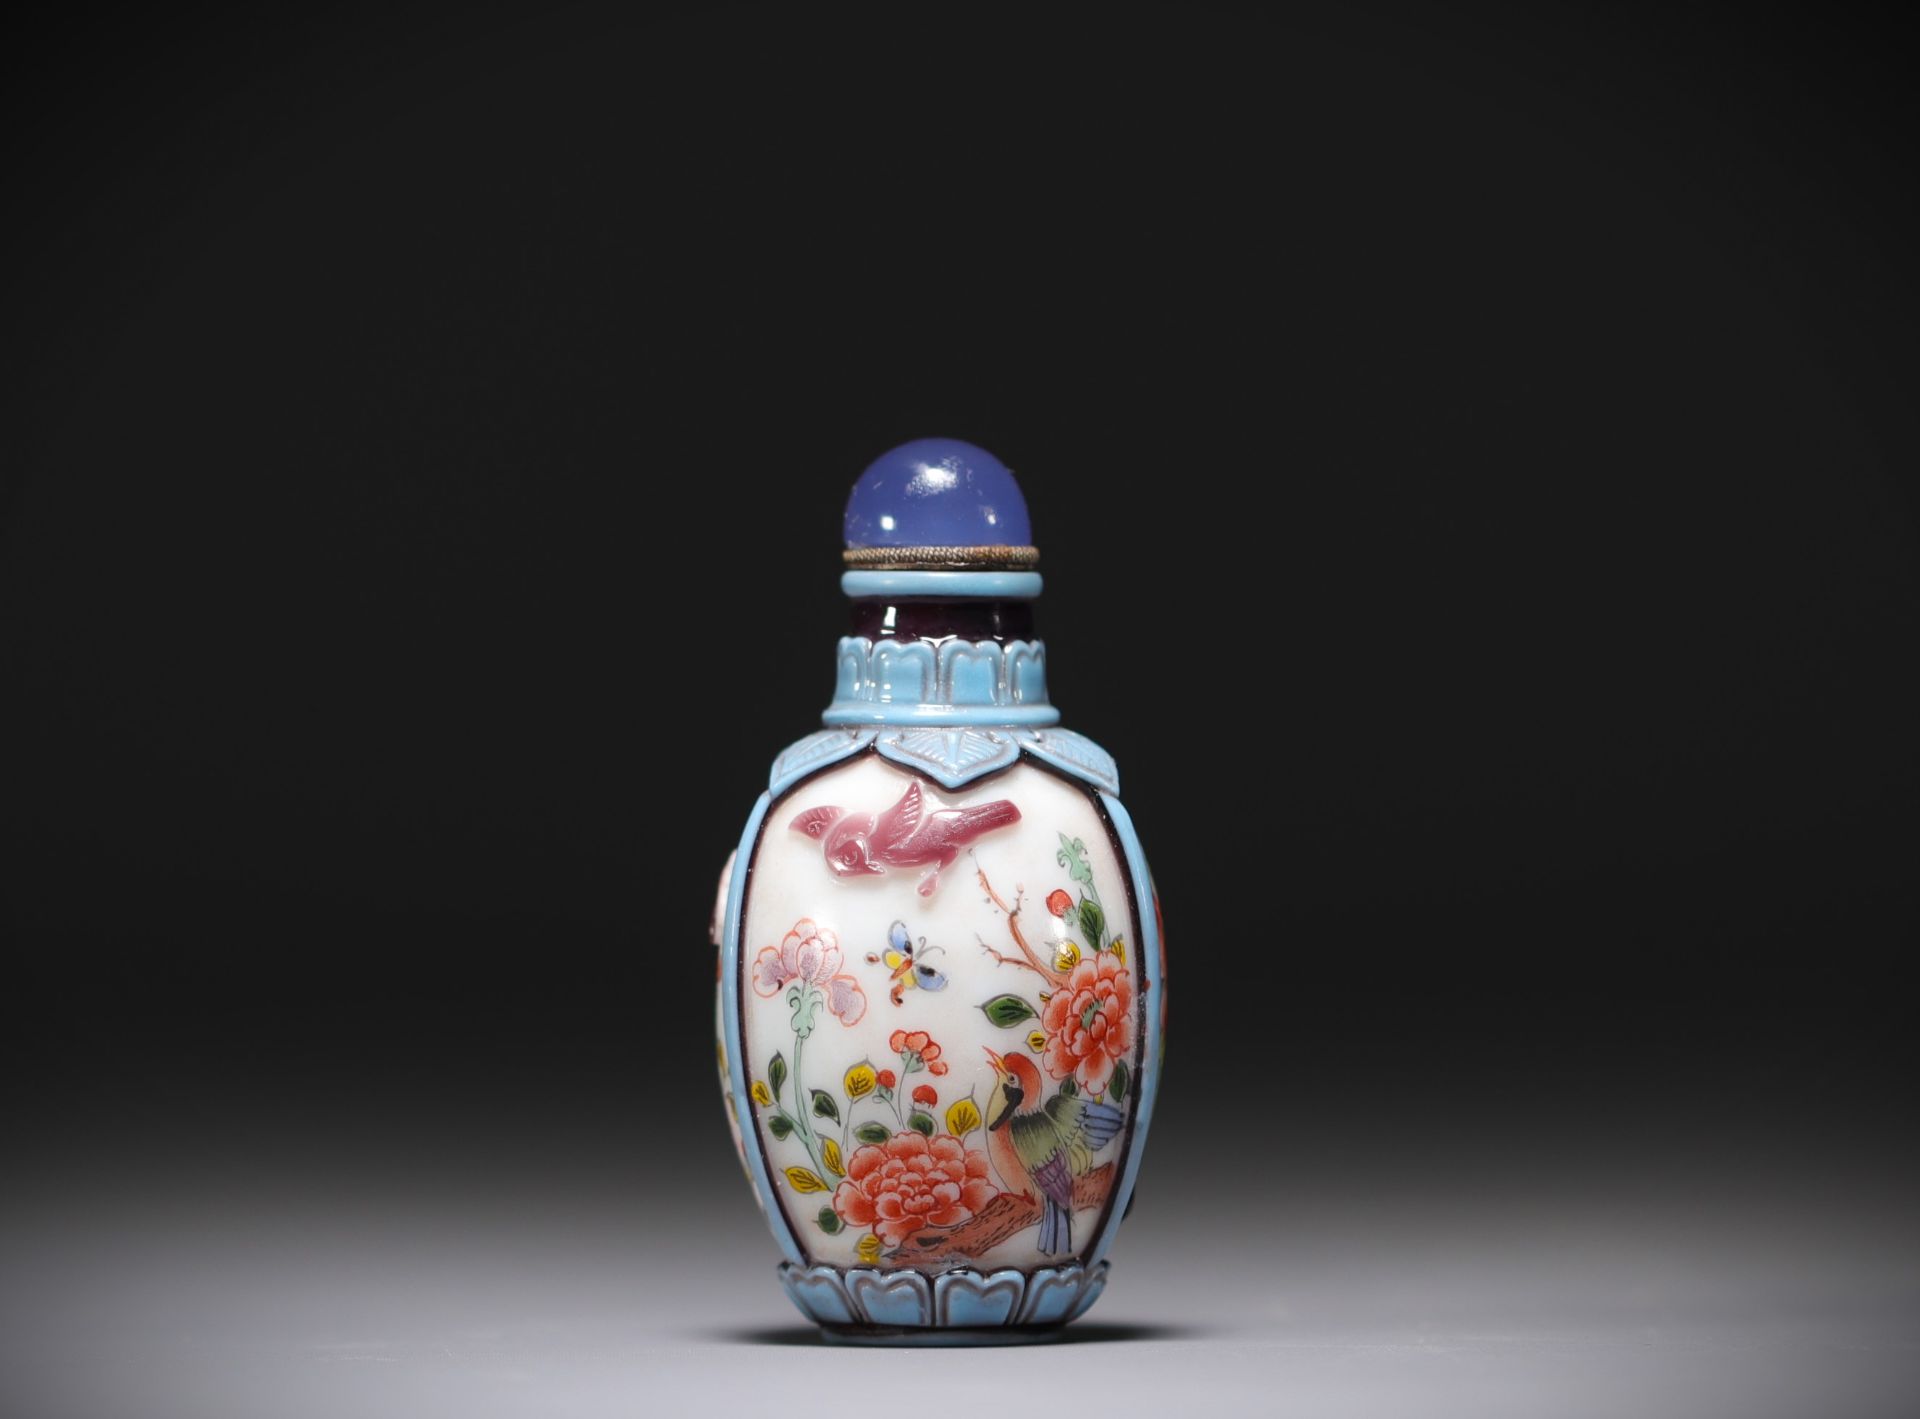 China - Snuffbox in multi-layered glass with painted and enamelled decoration - Qianlong